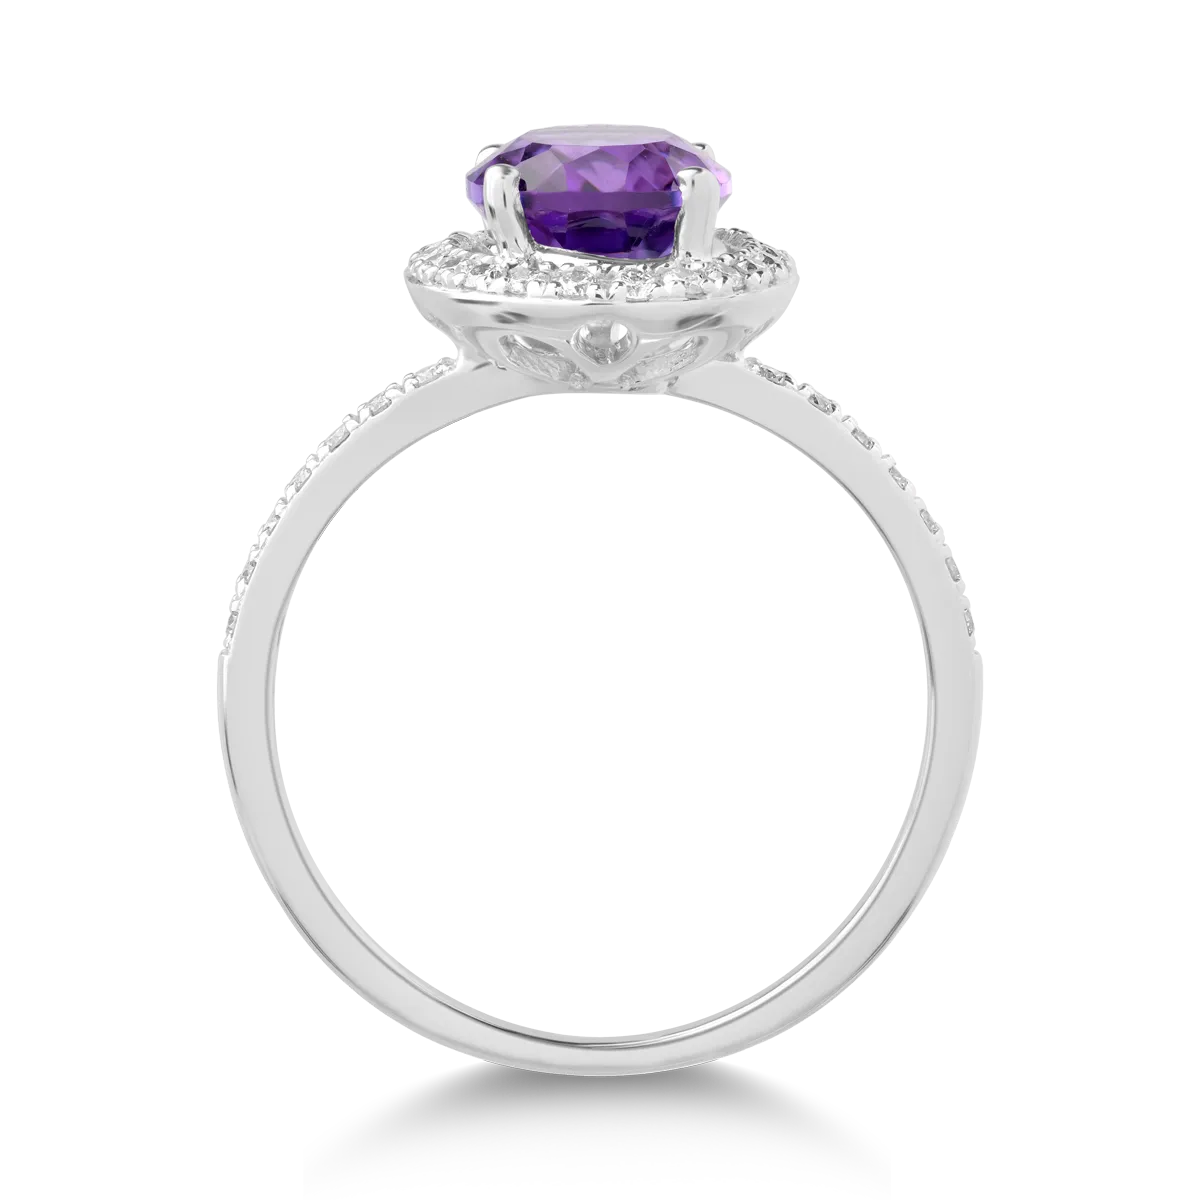 18K white gold ring with 2ct amethyst and 0.26ct diamonds